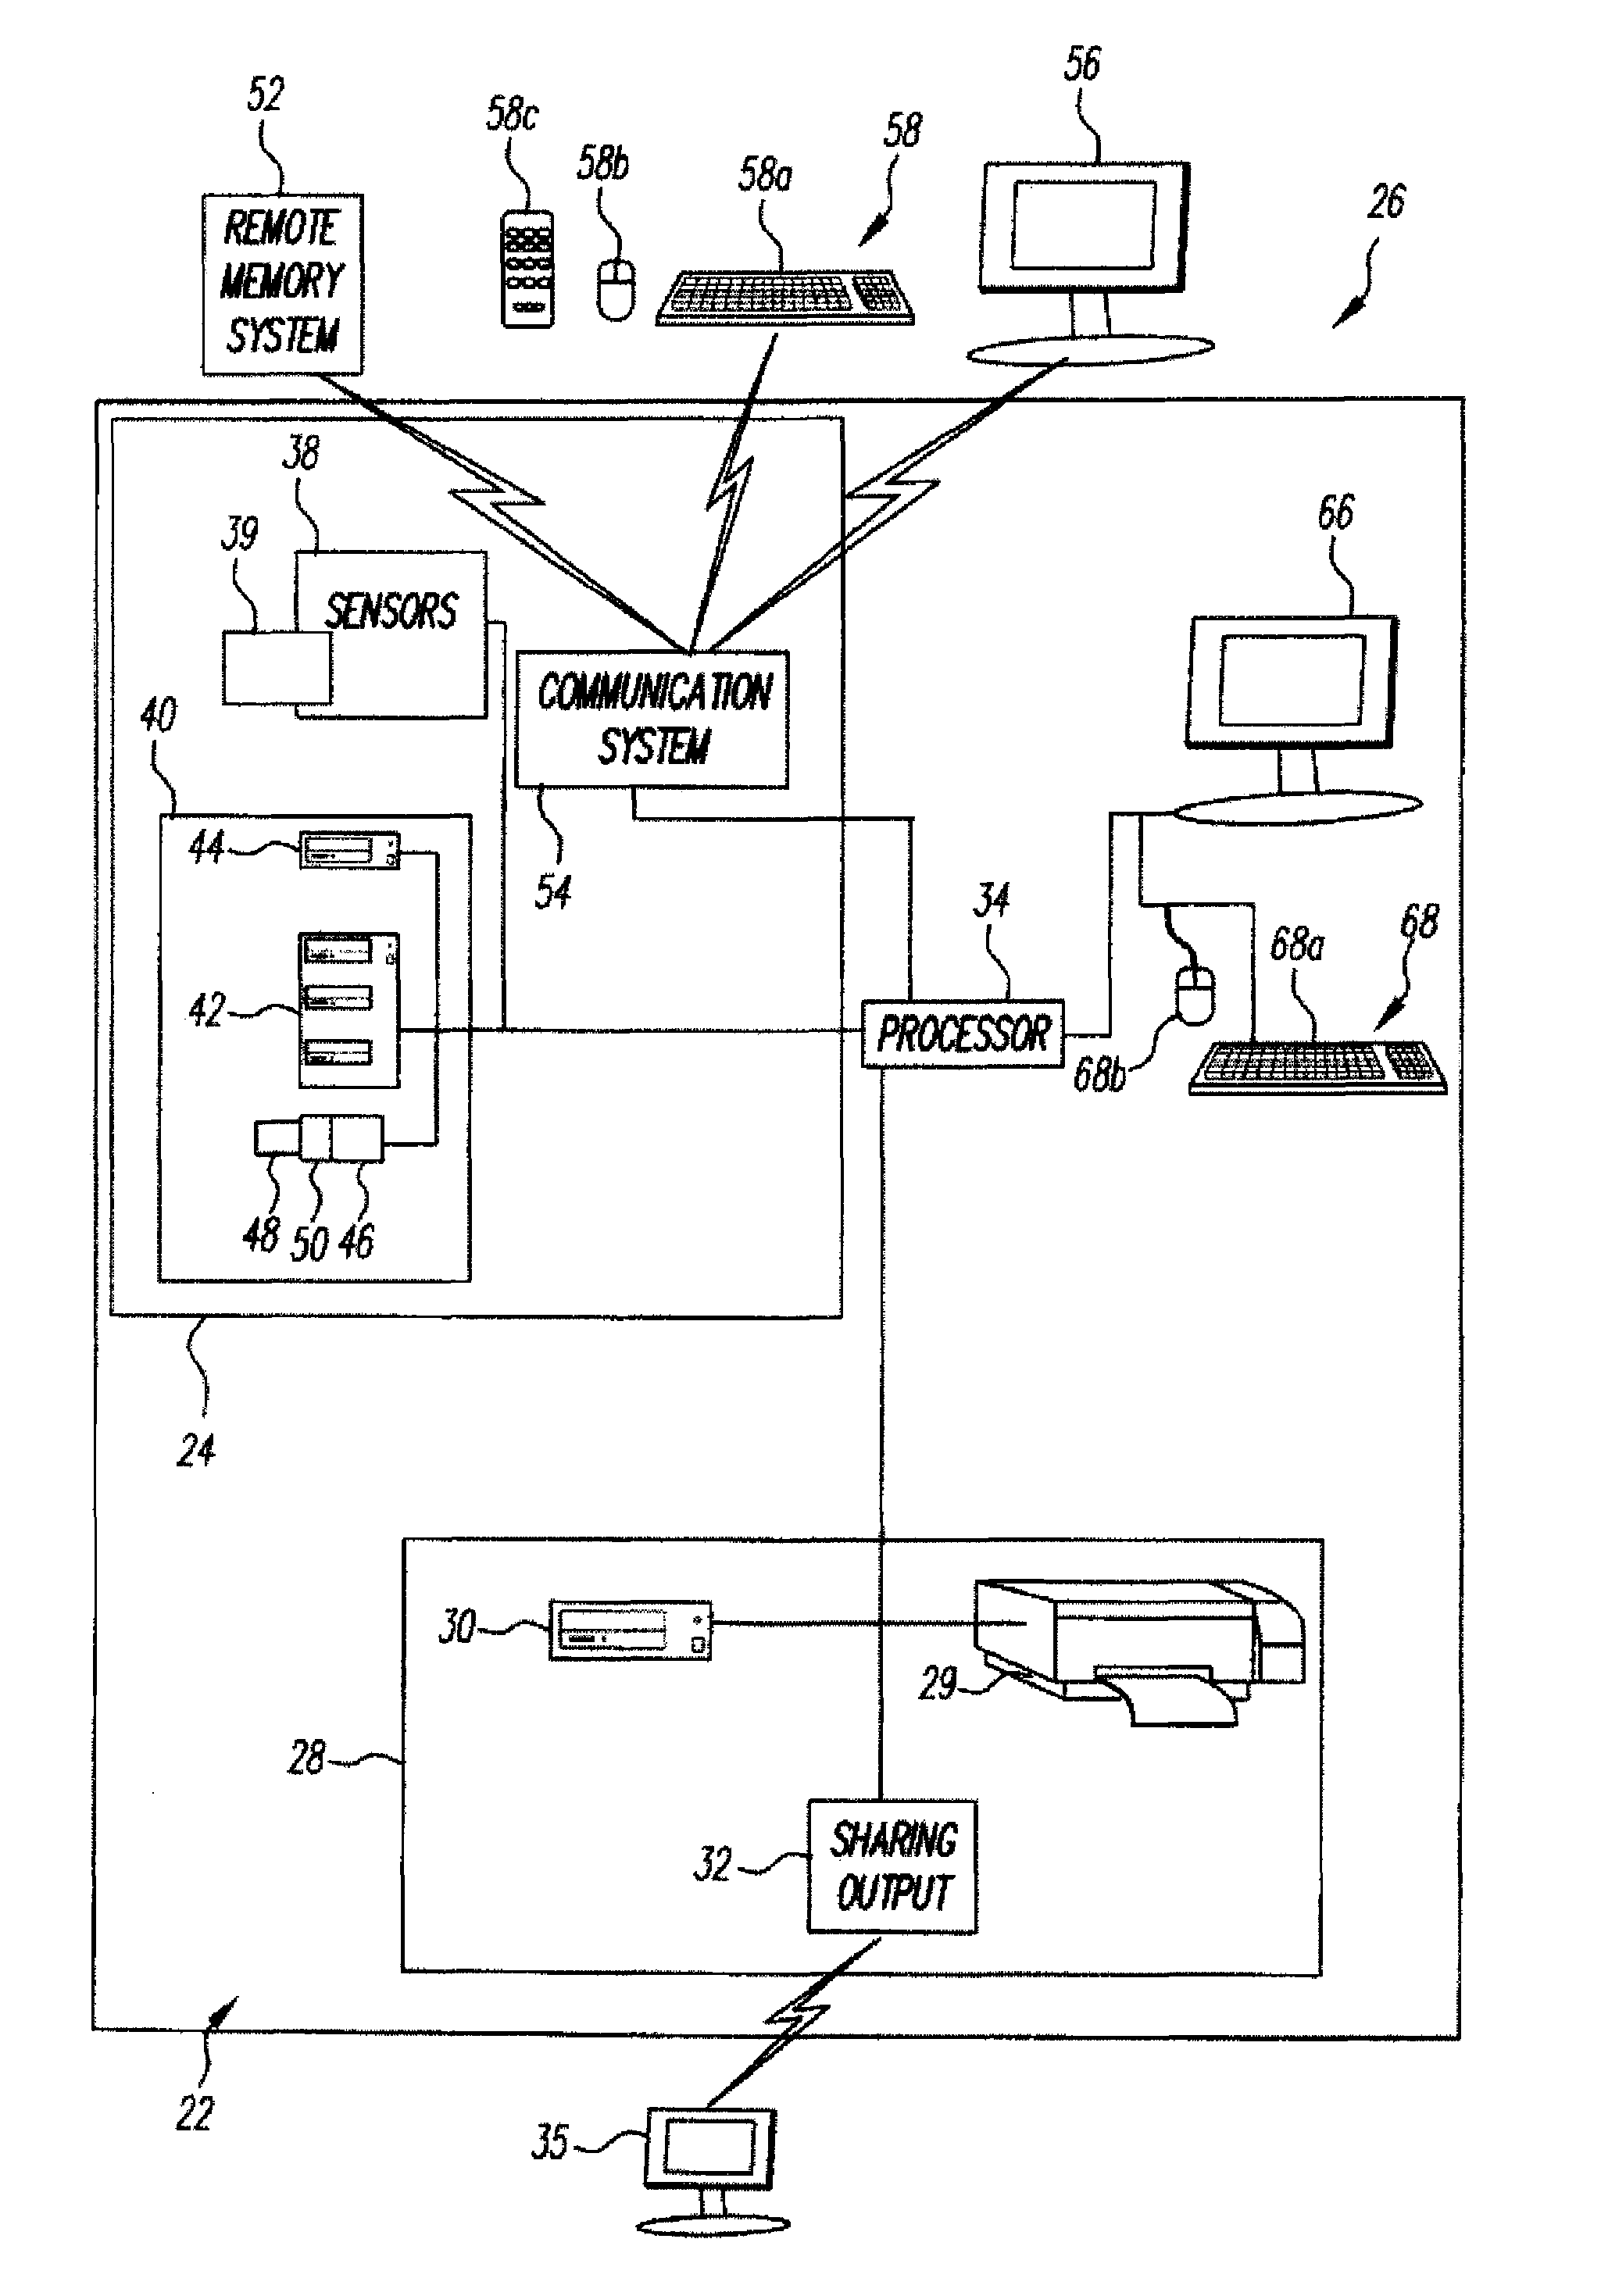 Method of making an artistic digital template for image display